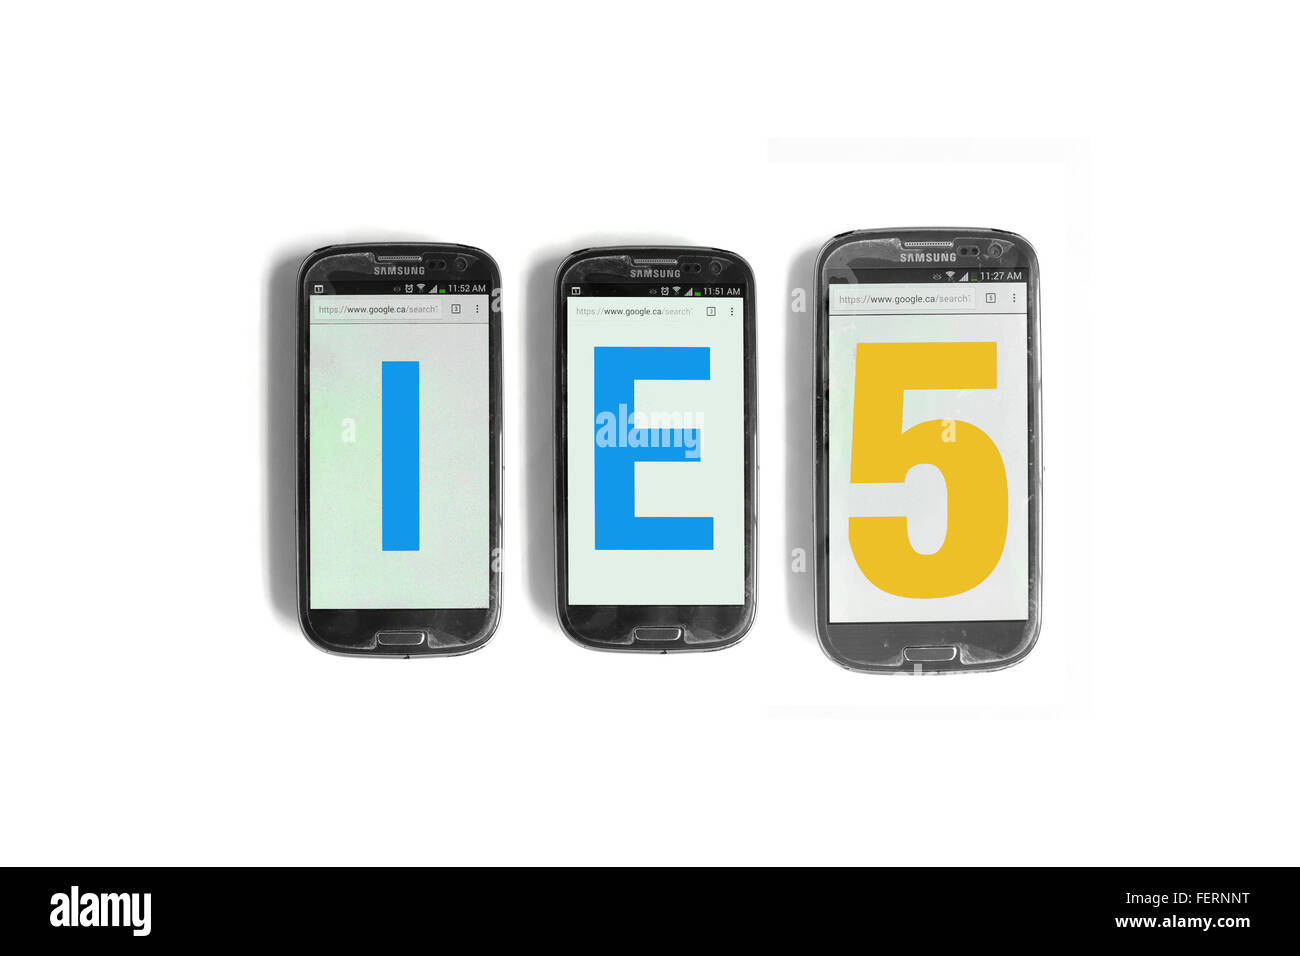 IE5 on the screens of smartphones photographed against a  white background. Stock Photo